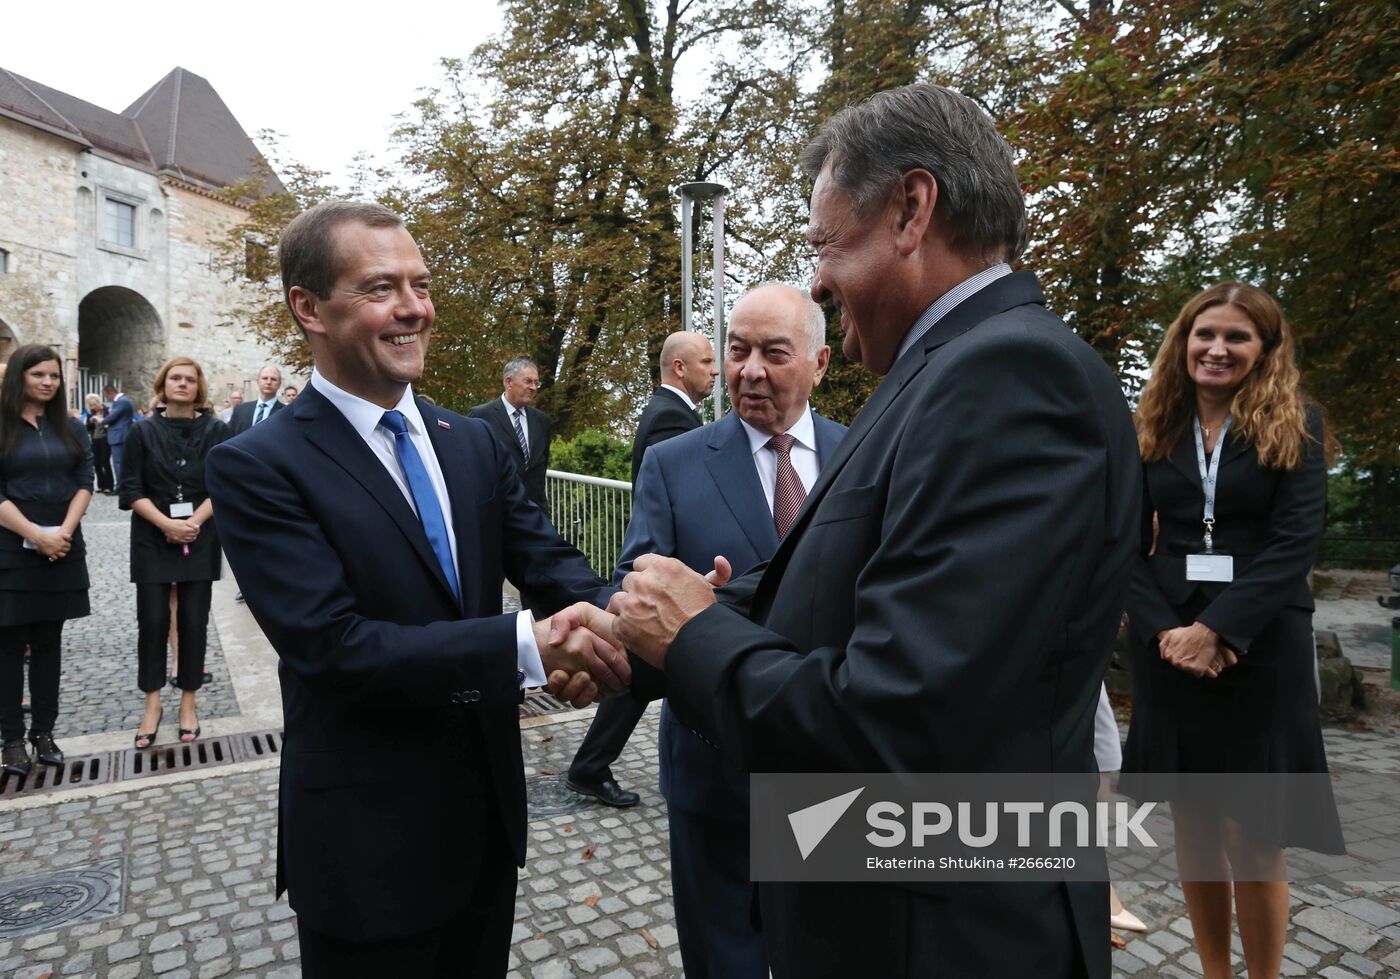 Russian Prime Minister Dmitry Medvedev's working visit to Slovenia. Day two